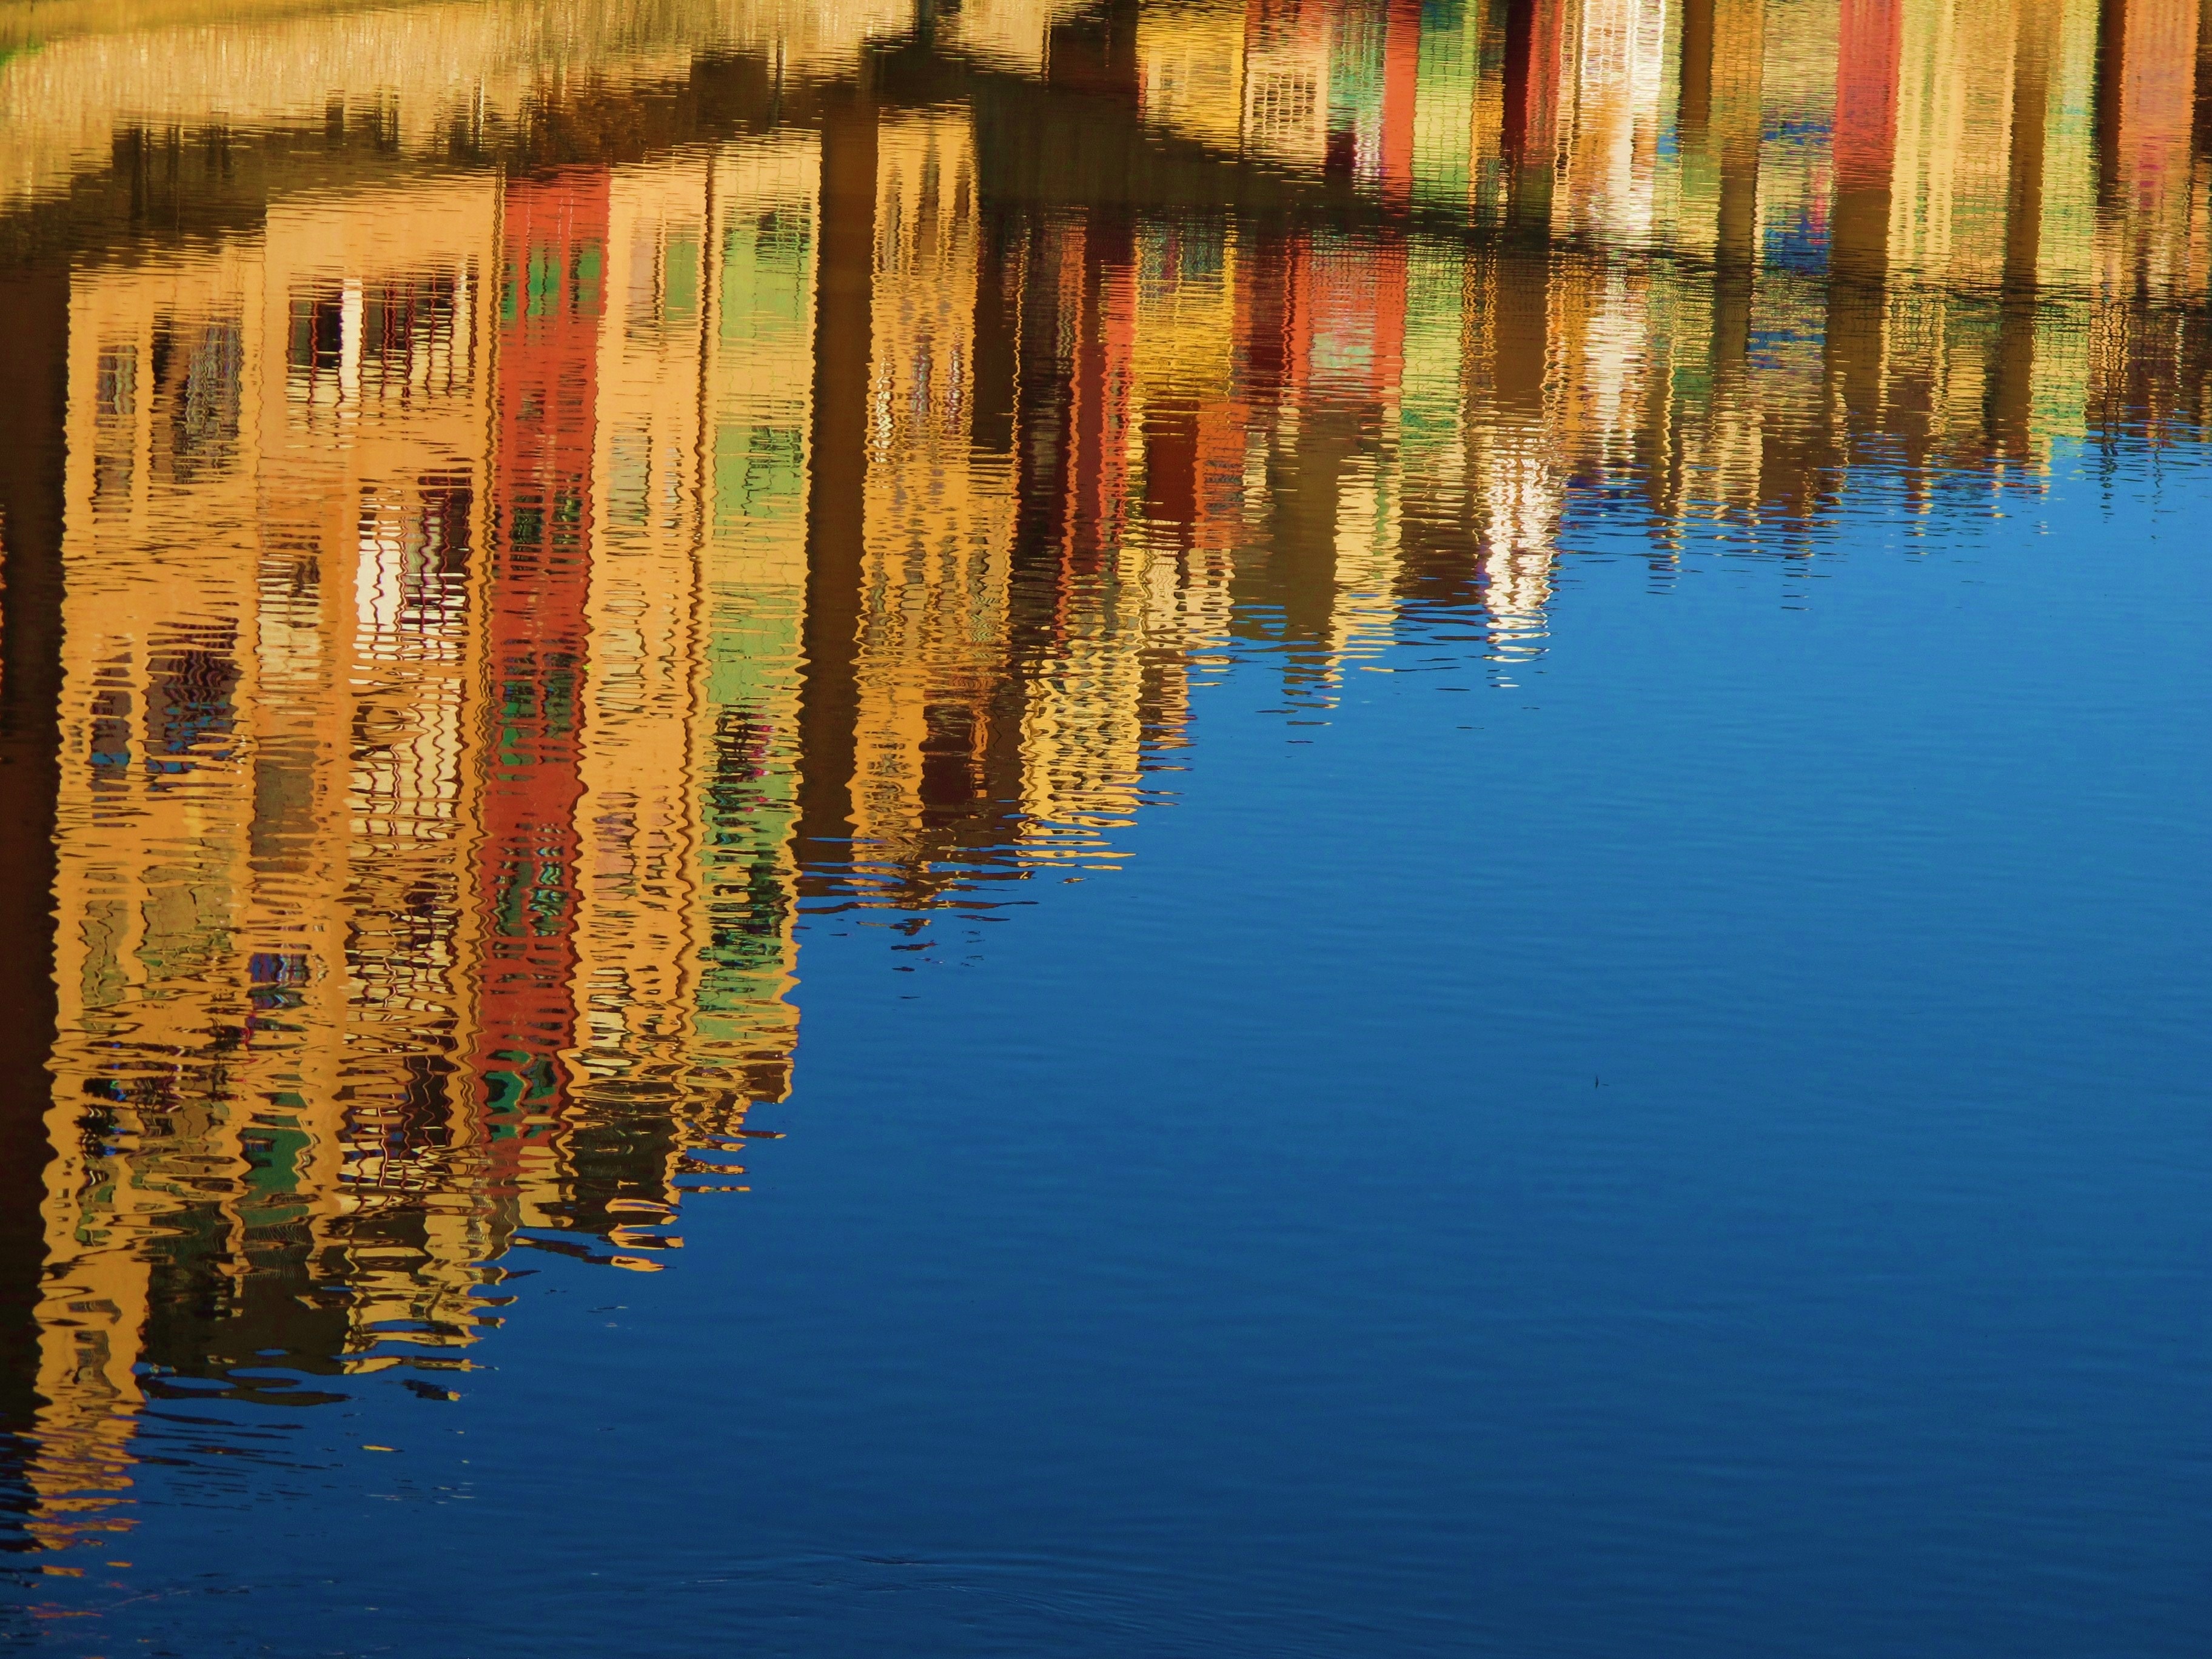 photography of reflectorize buildings on the wter